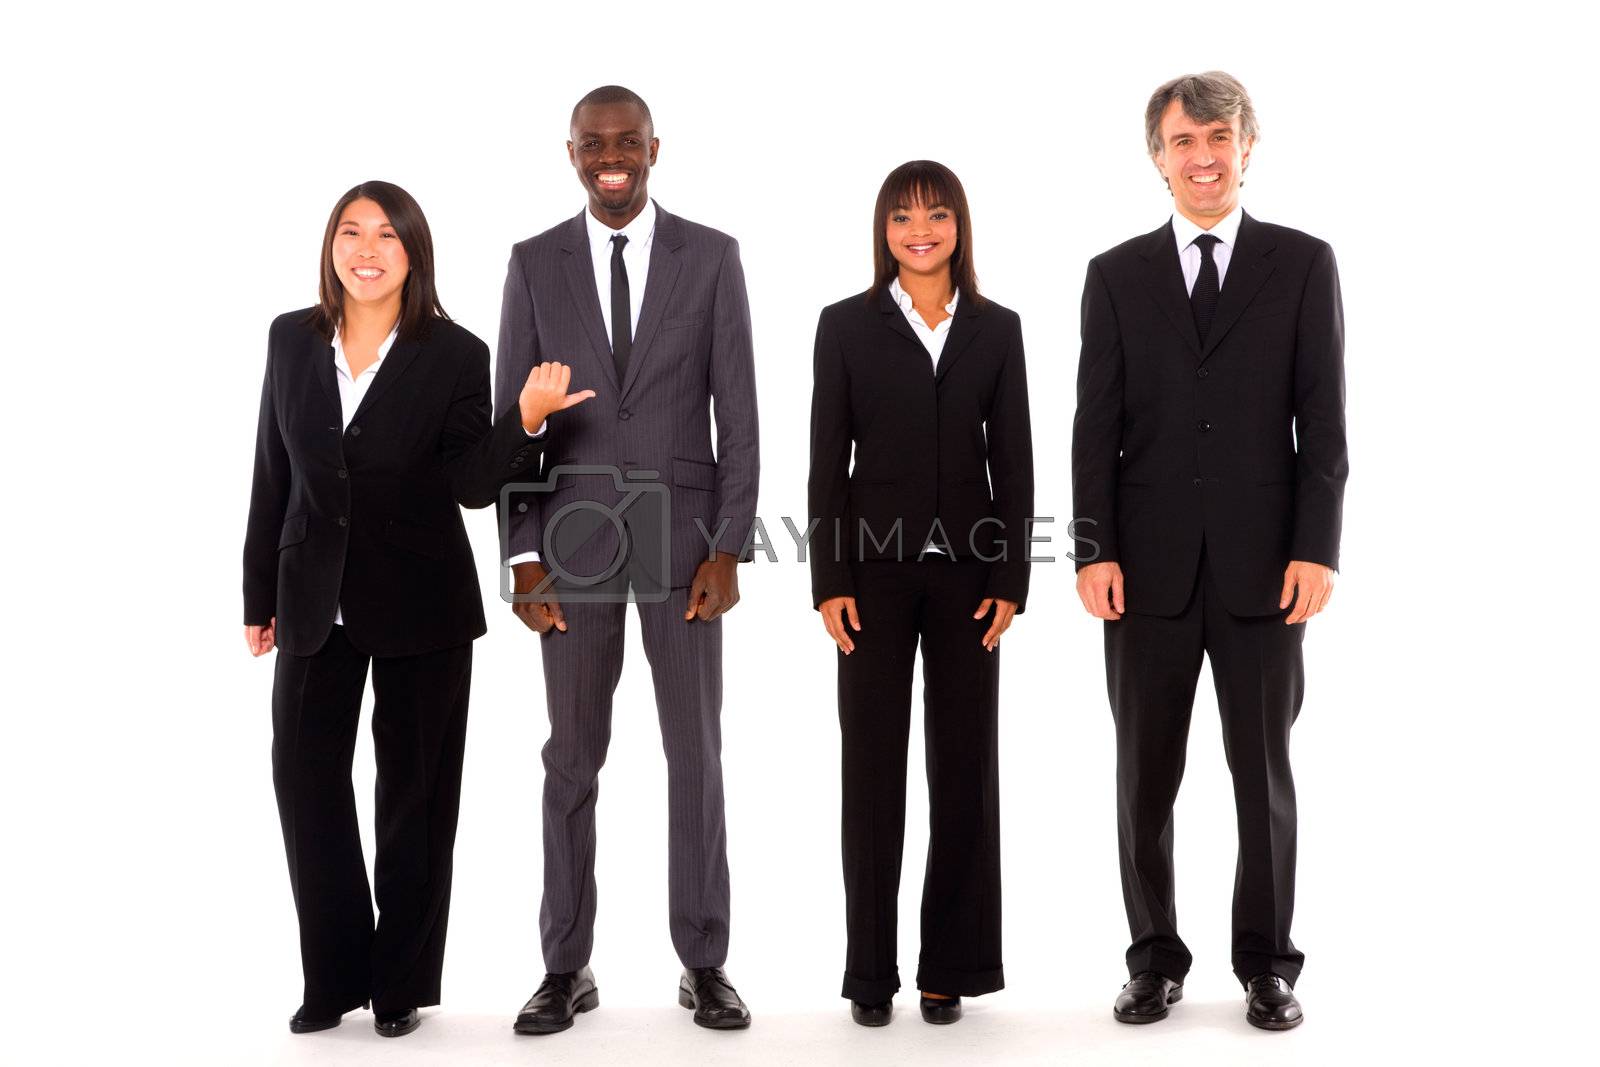 Royalty free image of multi-ethnic team by ambro